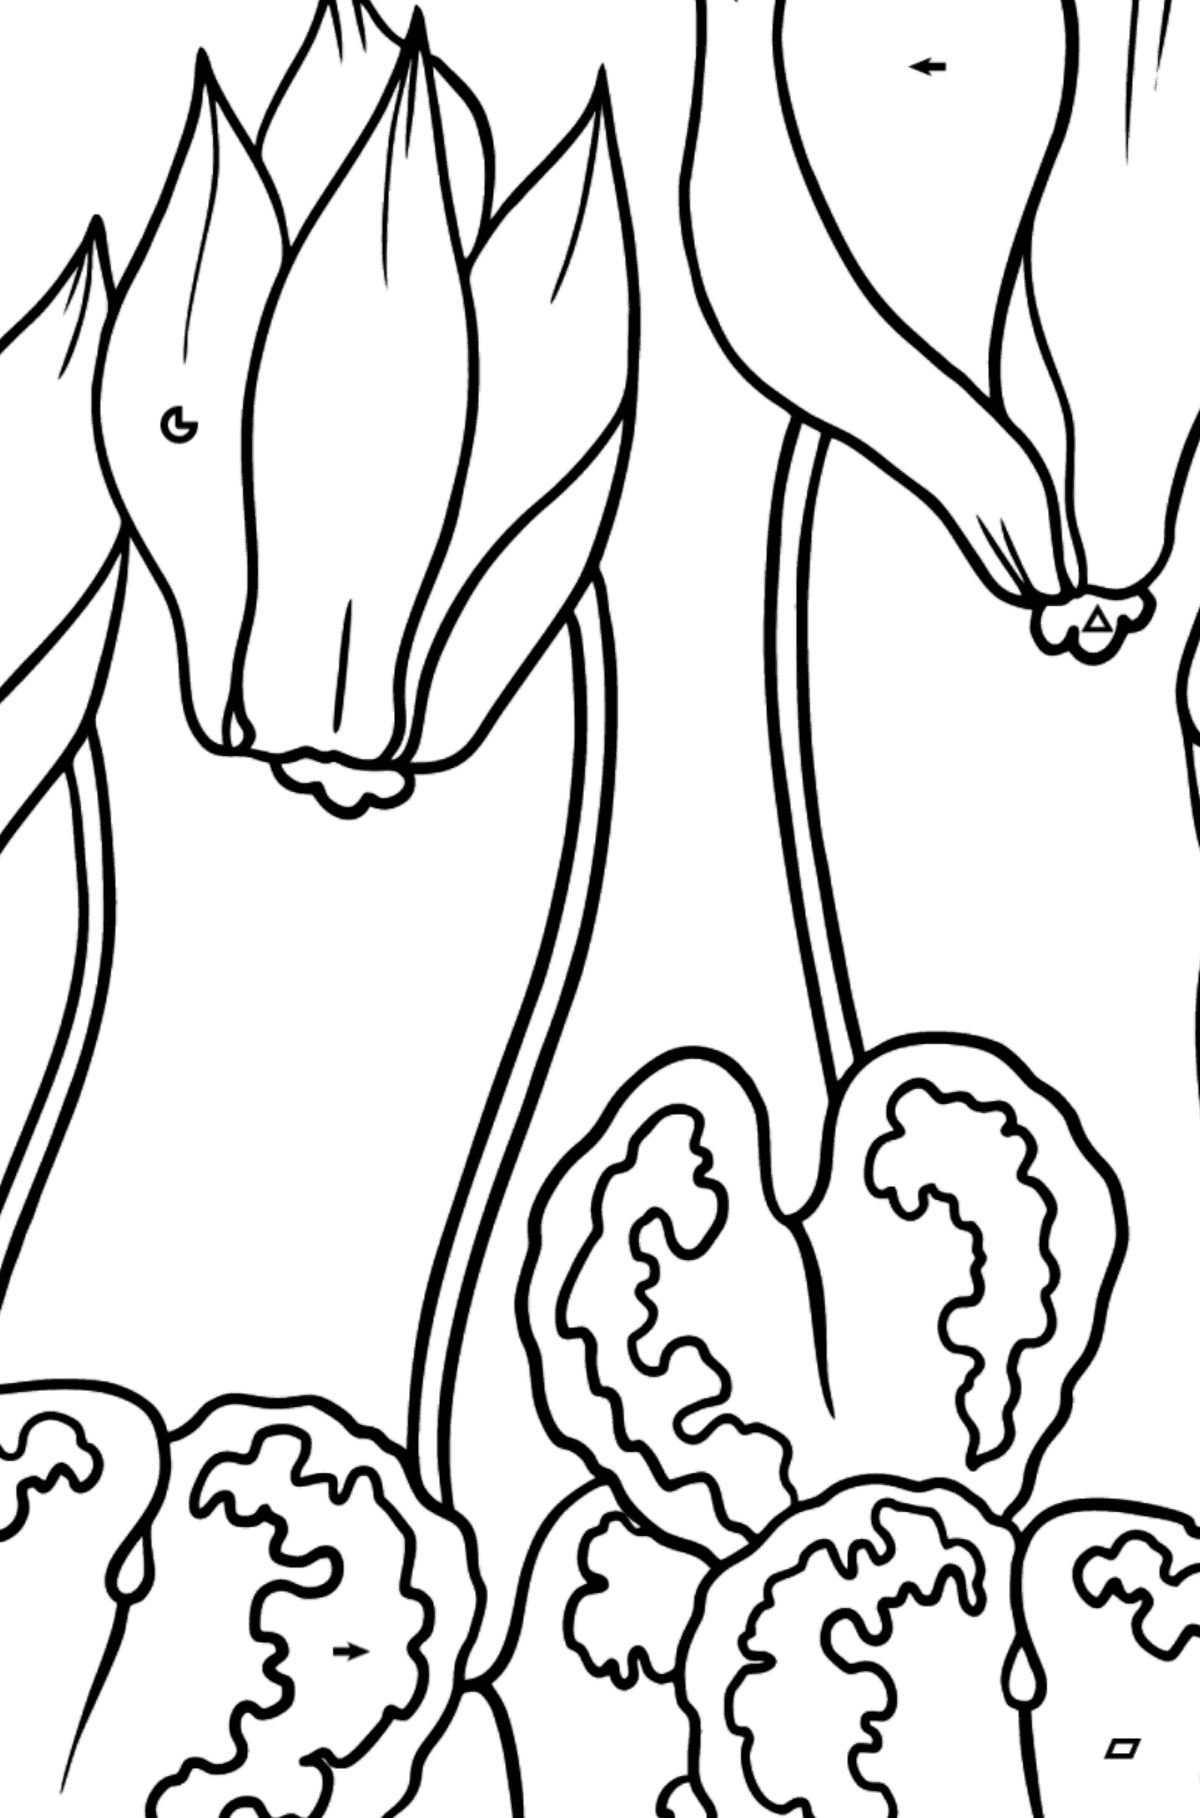 Coloring Page Red and Pink Cyclamen - Coloring by Symbols and Geometric Shapes for Kids